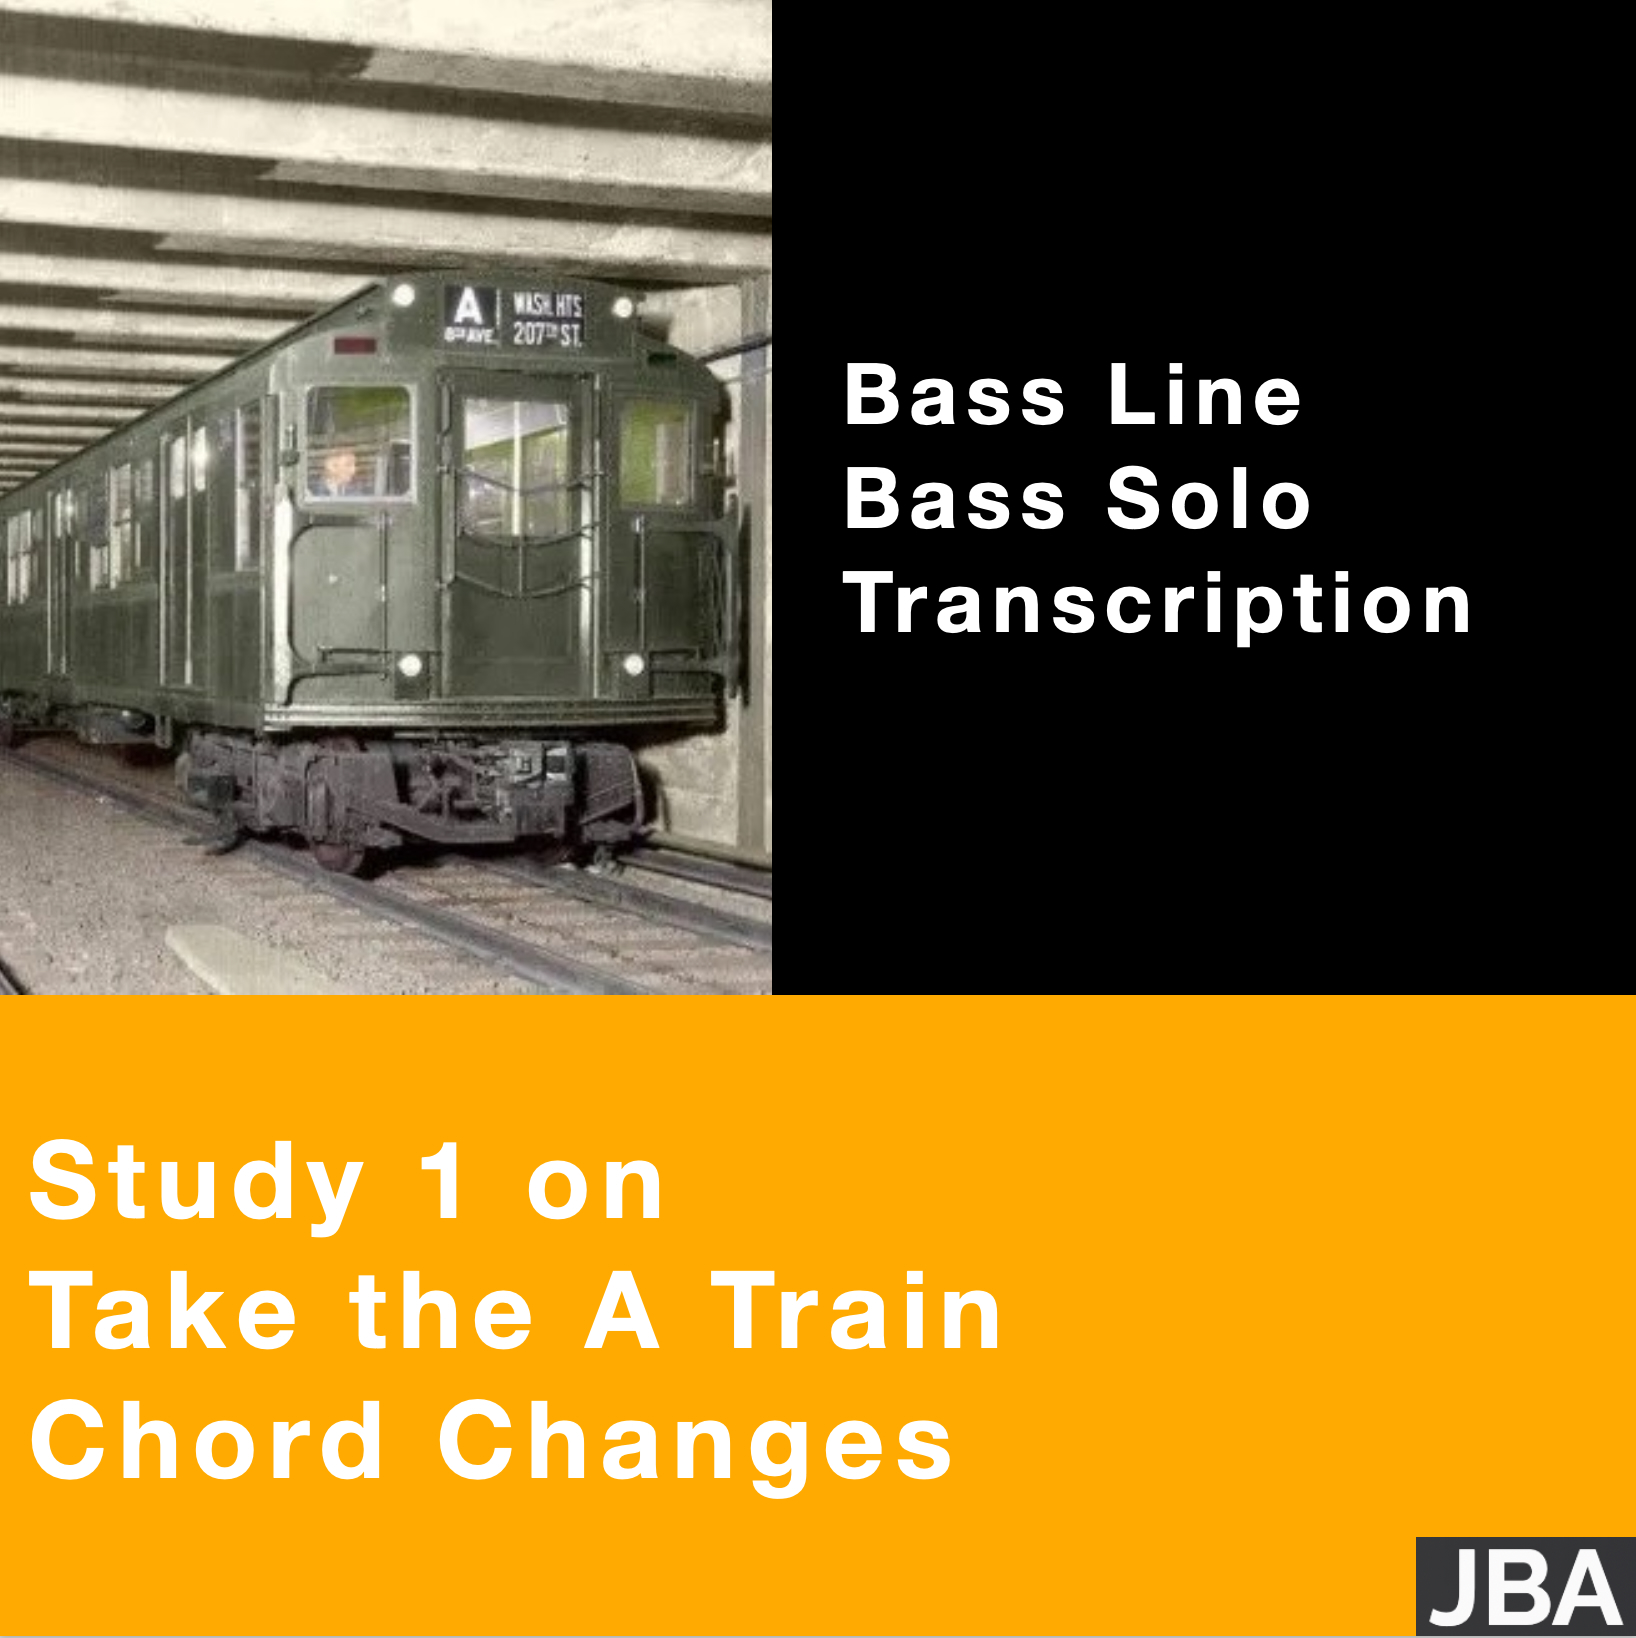 Study 1 on Take the A Train chord changes